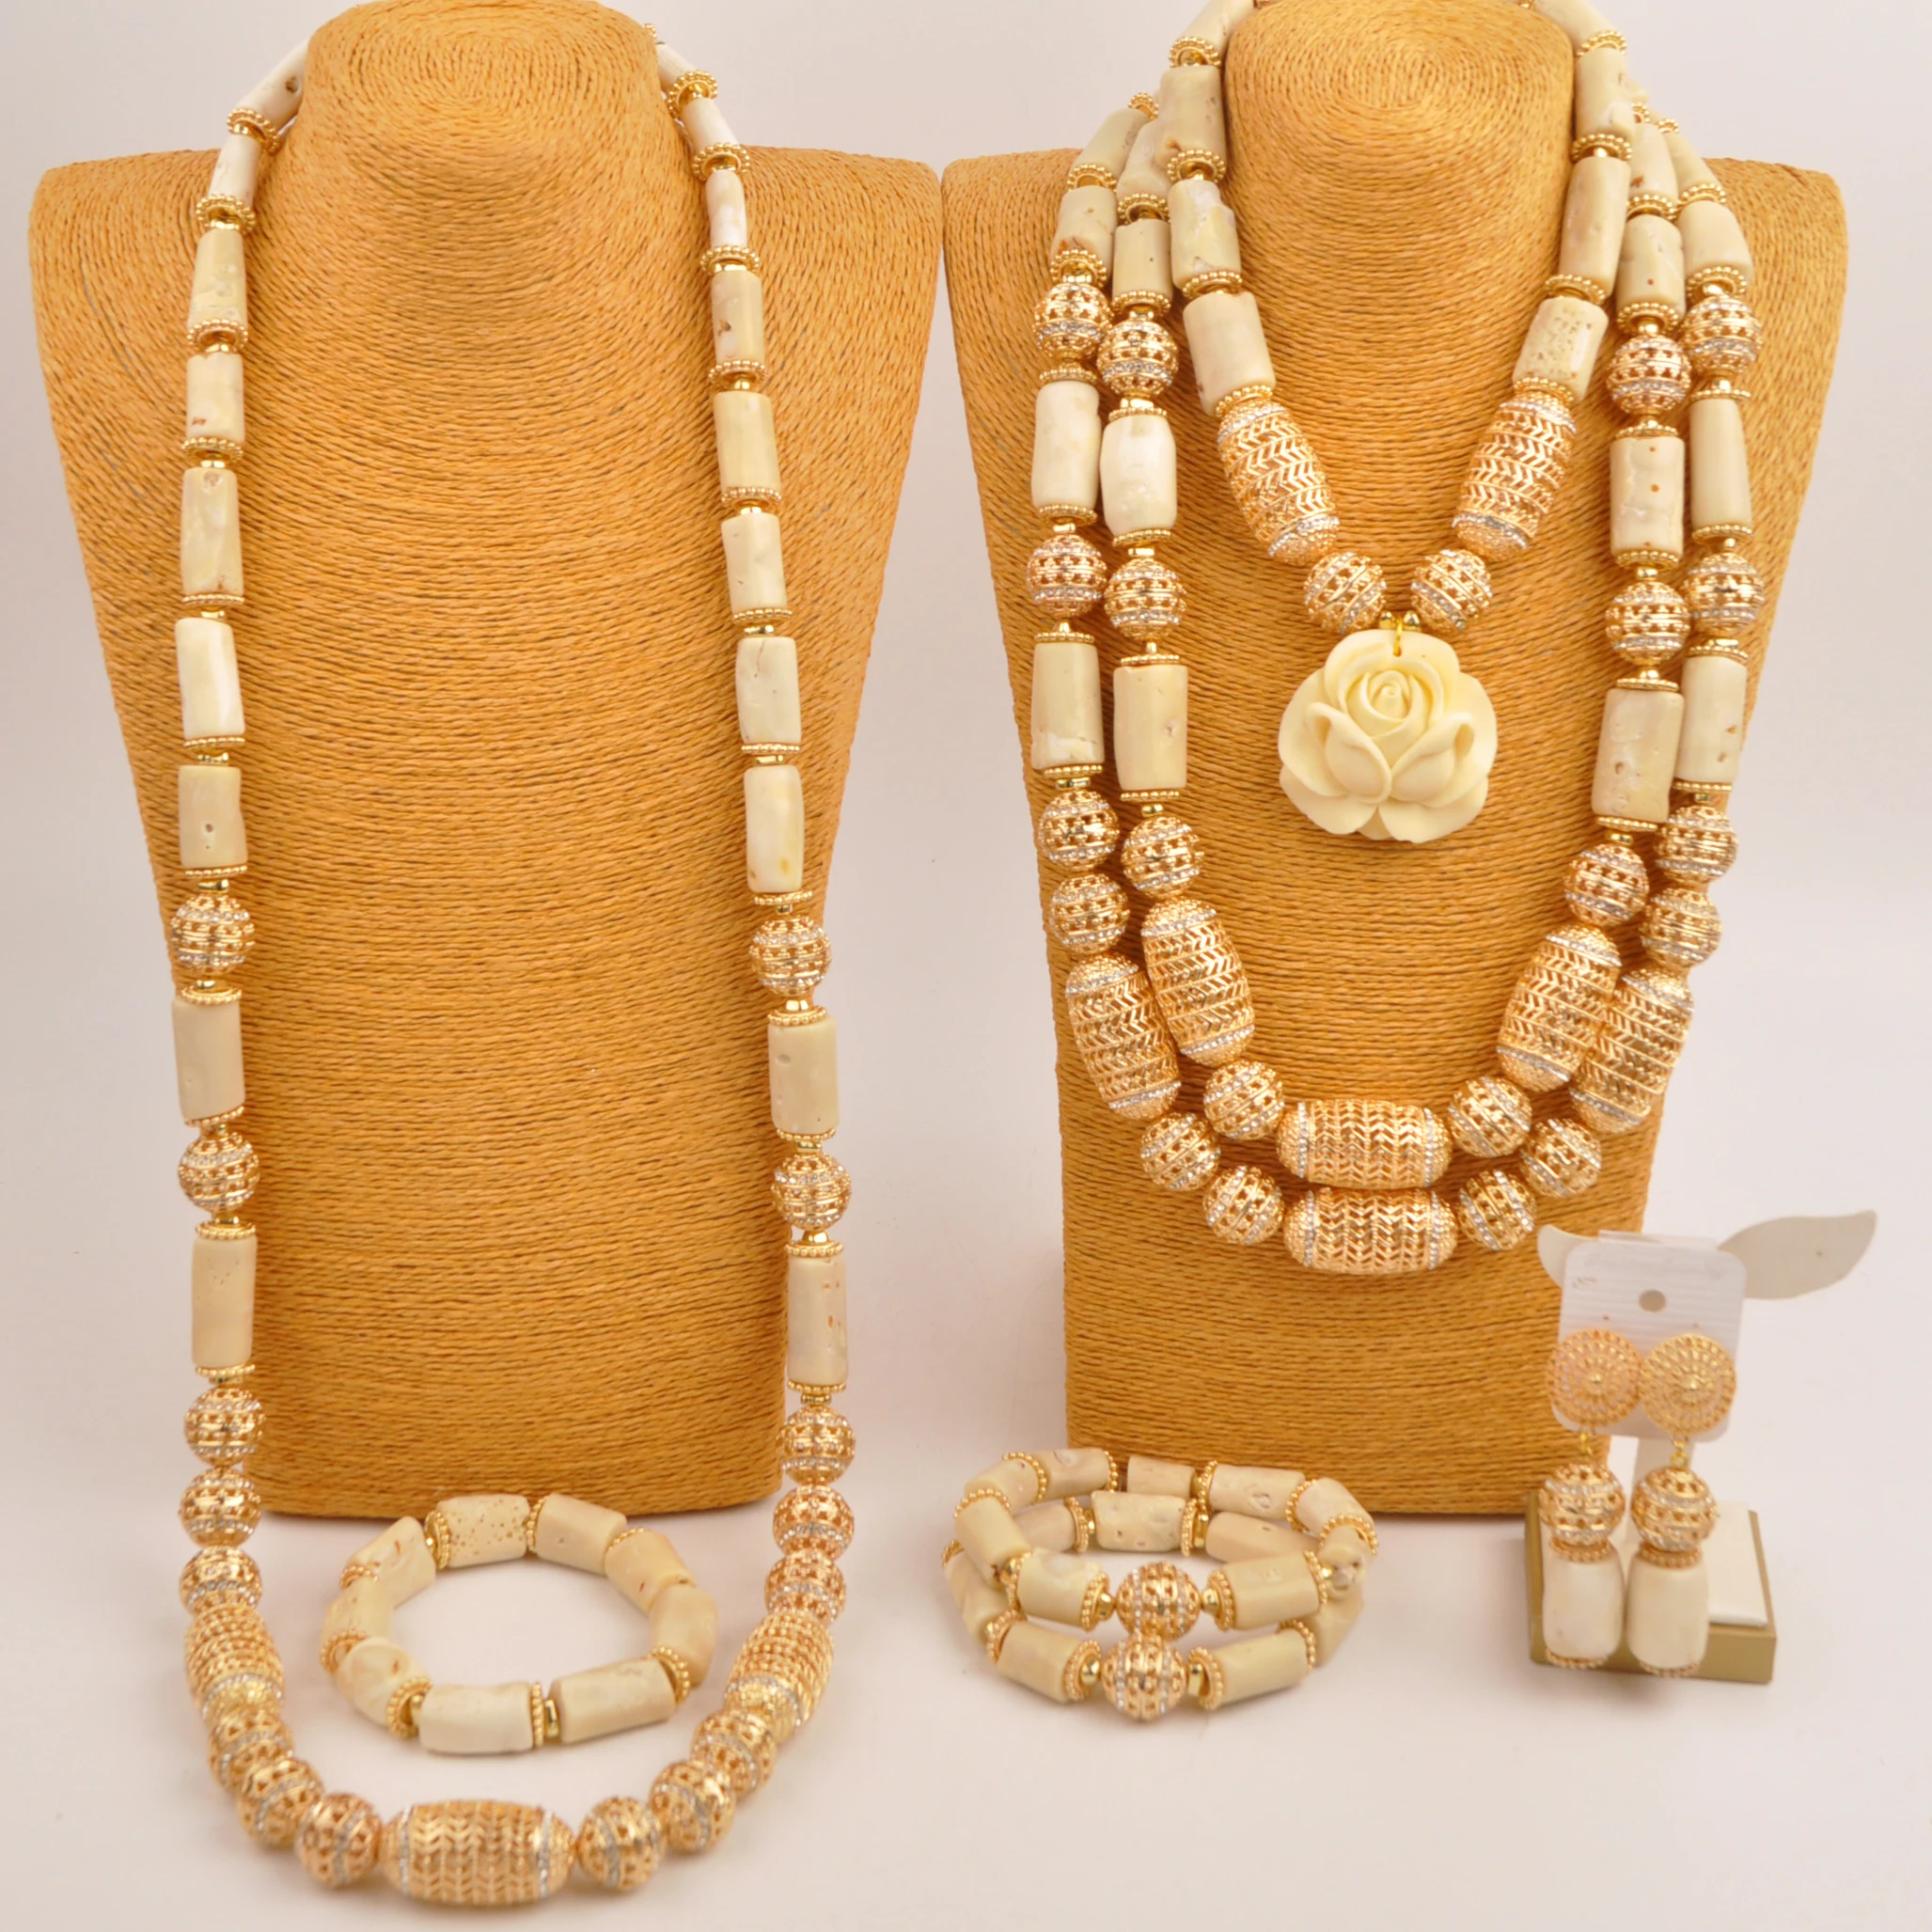 

Nigerian Bride Wedding Jewelry White Natural Coral Bead Necklace Sets for Couple